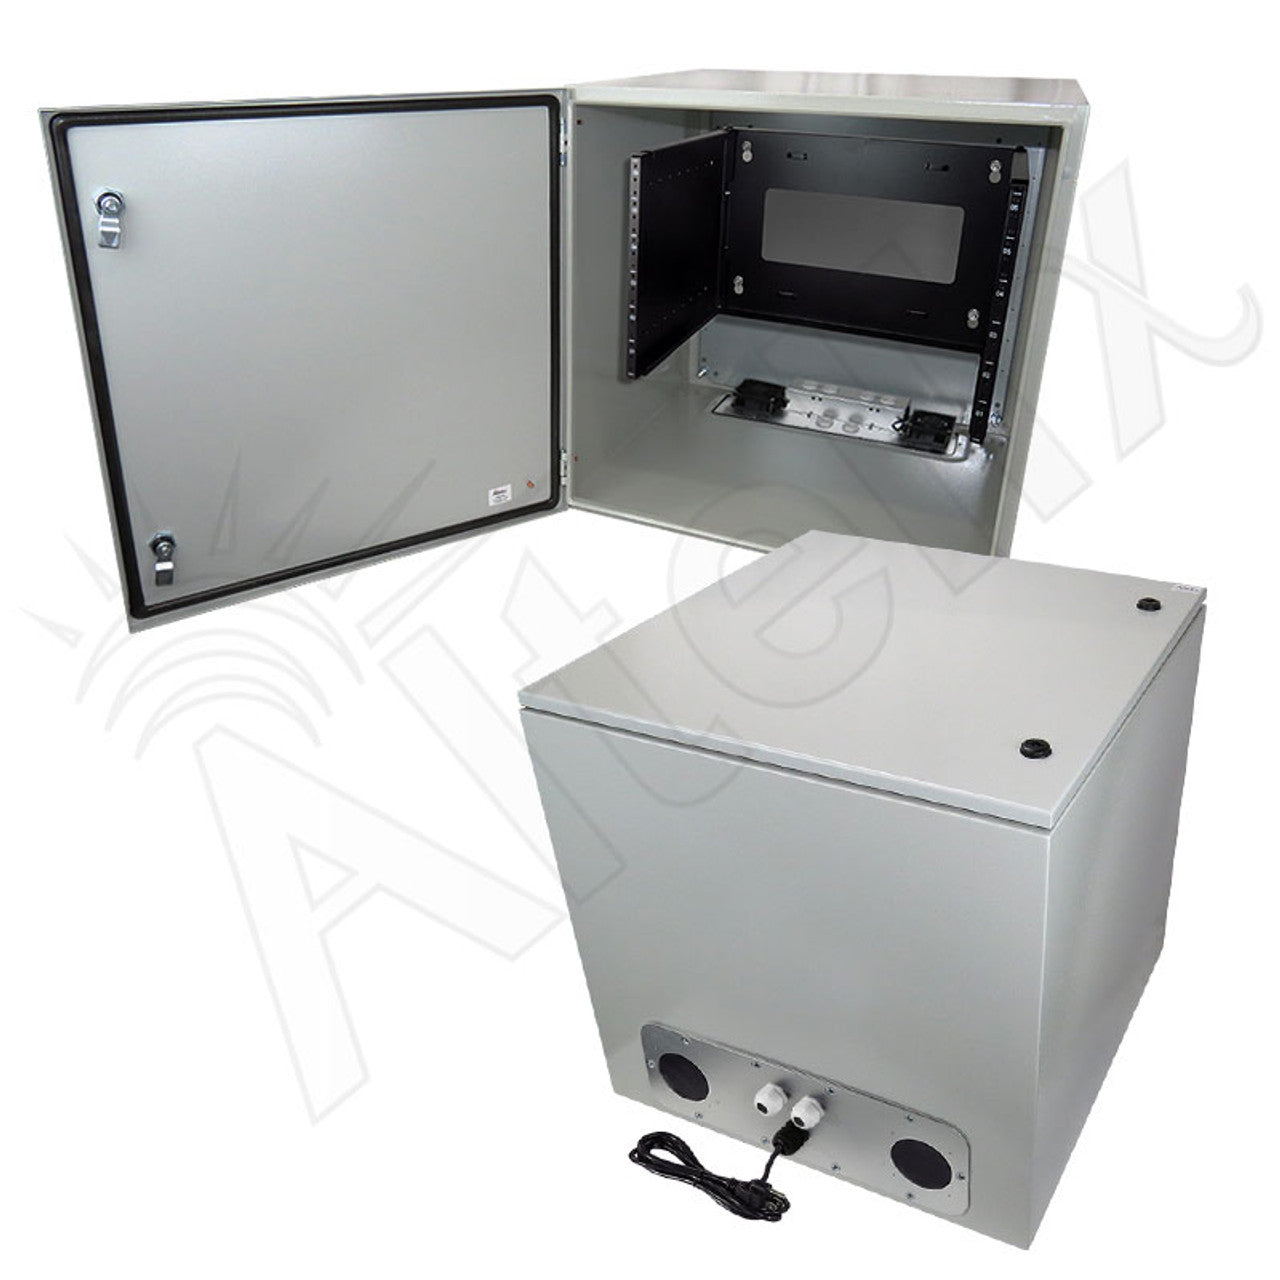 Altelix 19" Wide 6U Rack Steel Weatherproof NEMA Enclosure with Dual Cooling Fans, 120 VAC Outlets and Power Cord-3